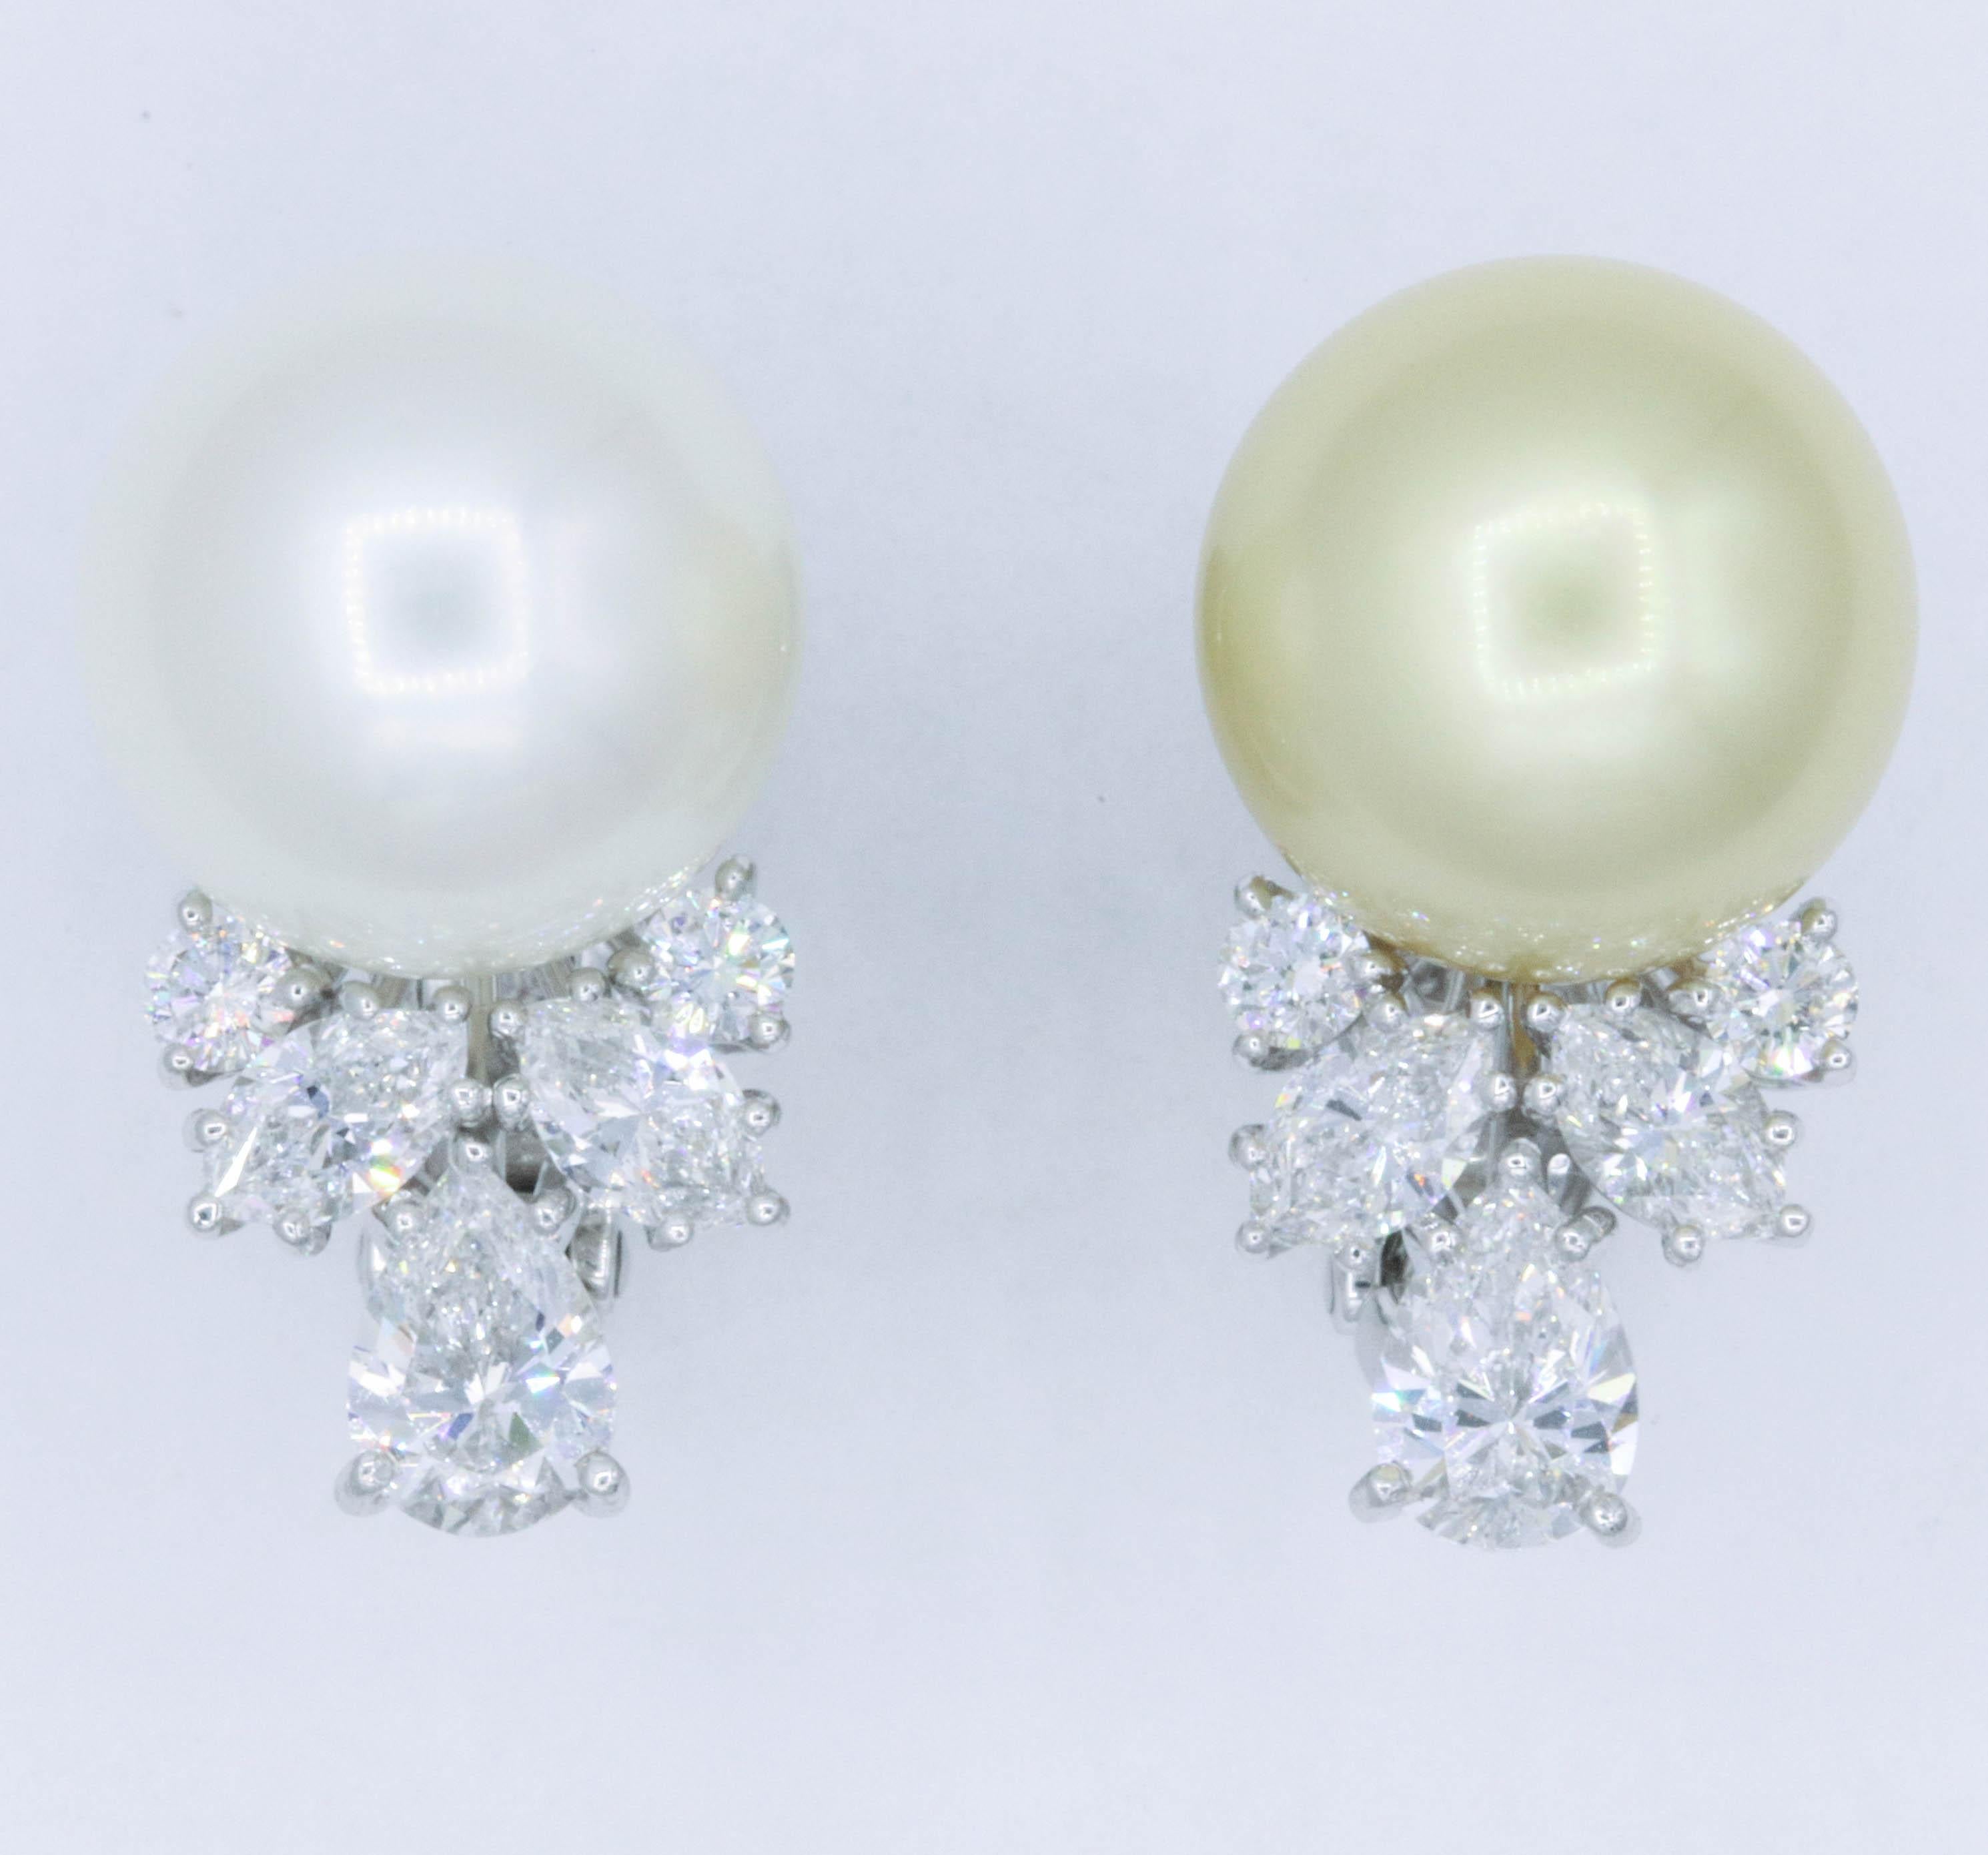 Elegant pair of mismatch pearl earrings featuring four marquise weighing 1.02 carats and four round diamonds weighing 0.37 carats, in platinum.
Pearls: 13.2-13.3 MM
Color: G
Clarity: VS